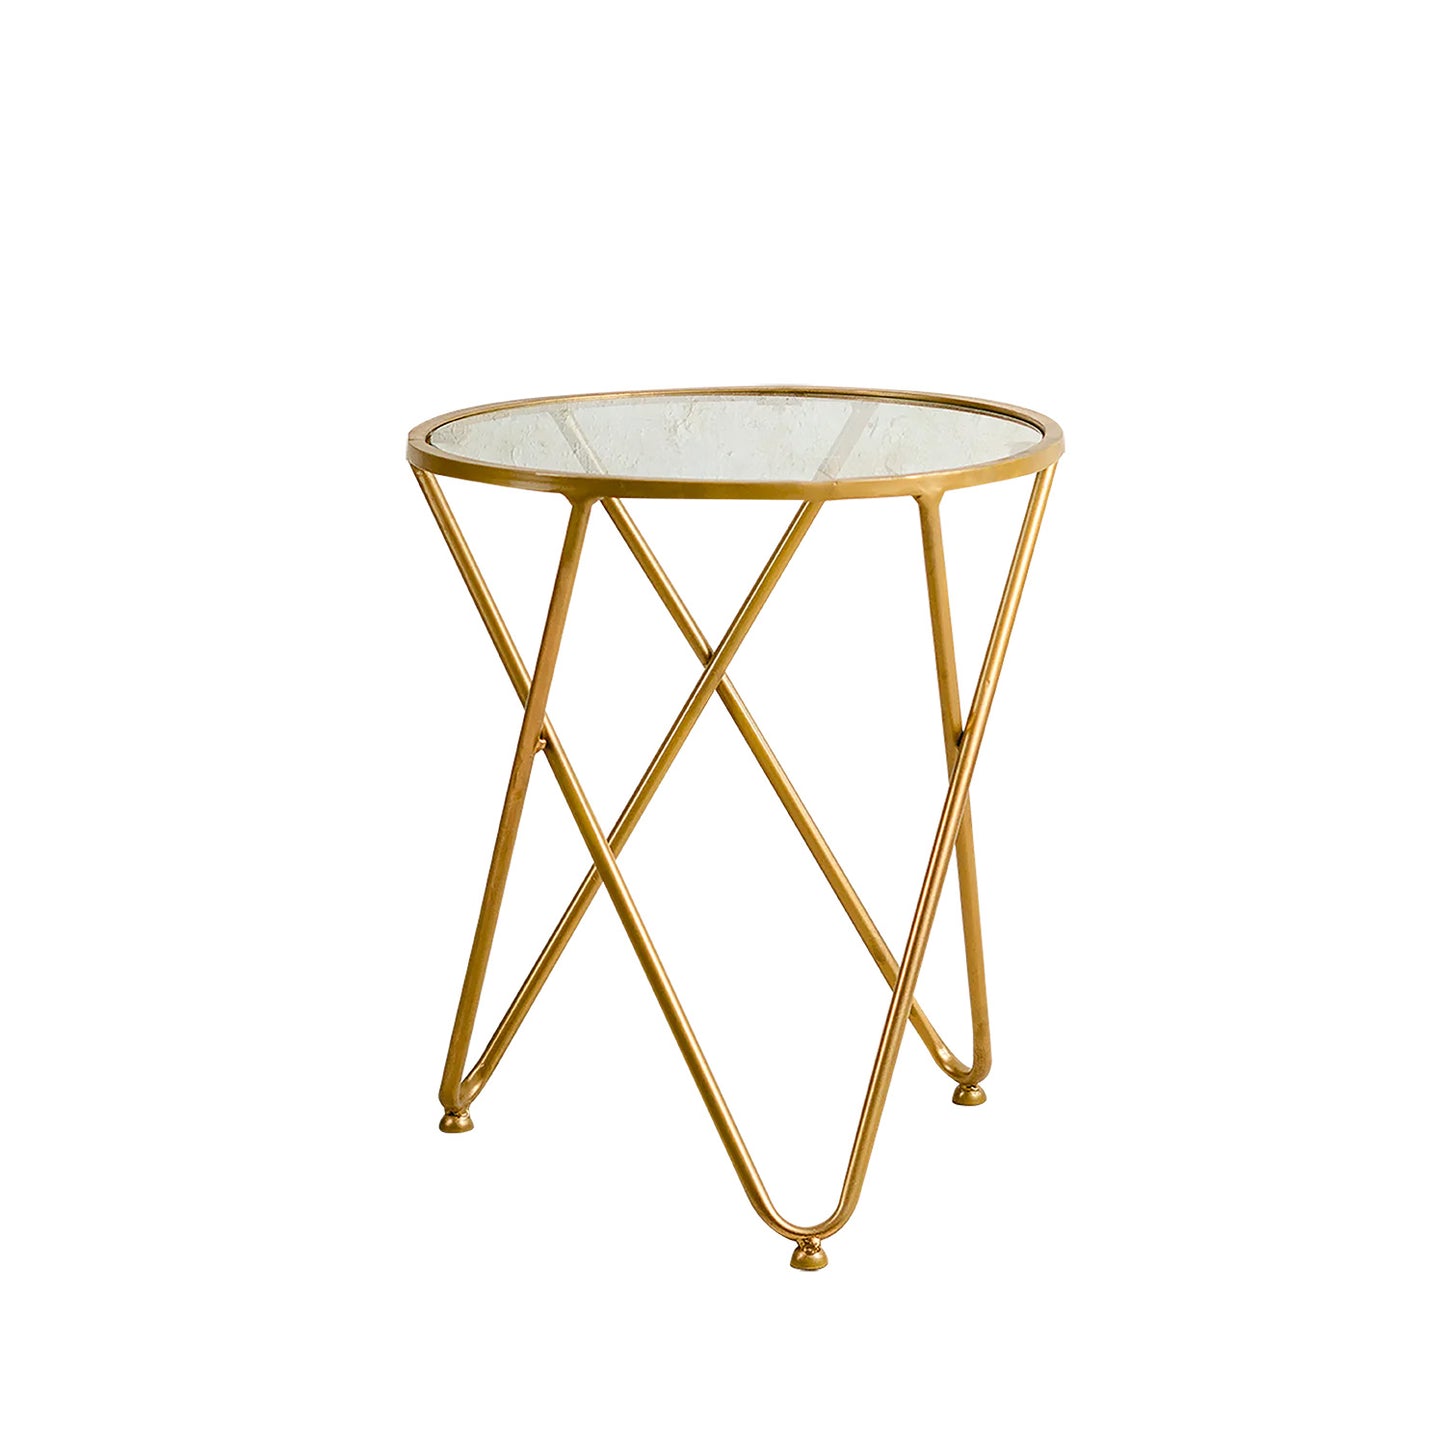 Contemporary Metallic Cross End Table in Gold Color Set of 2